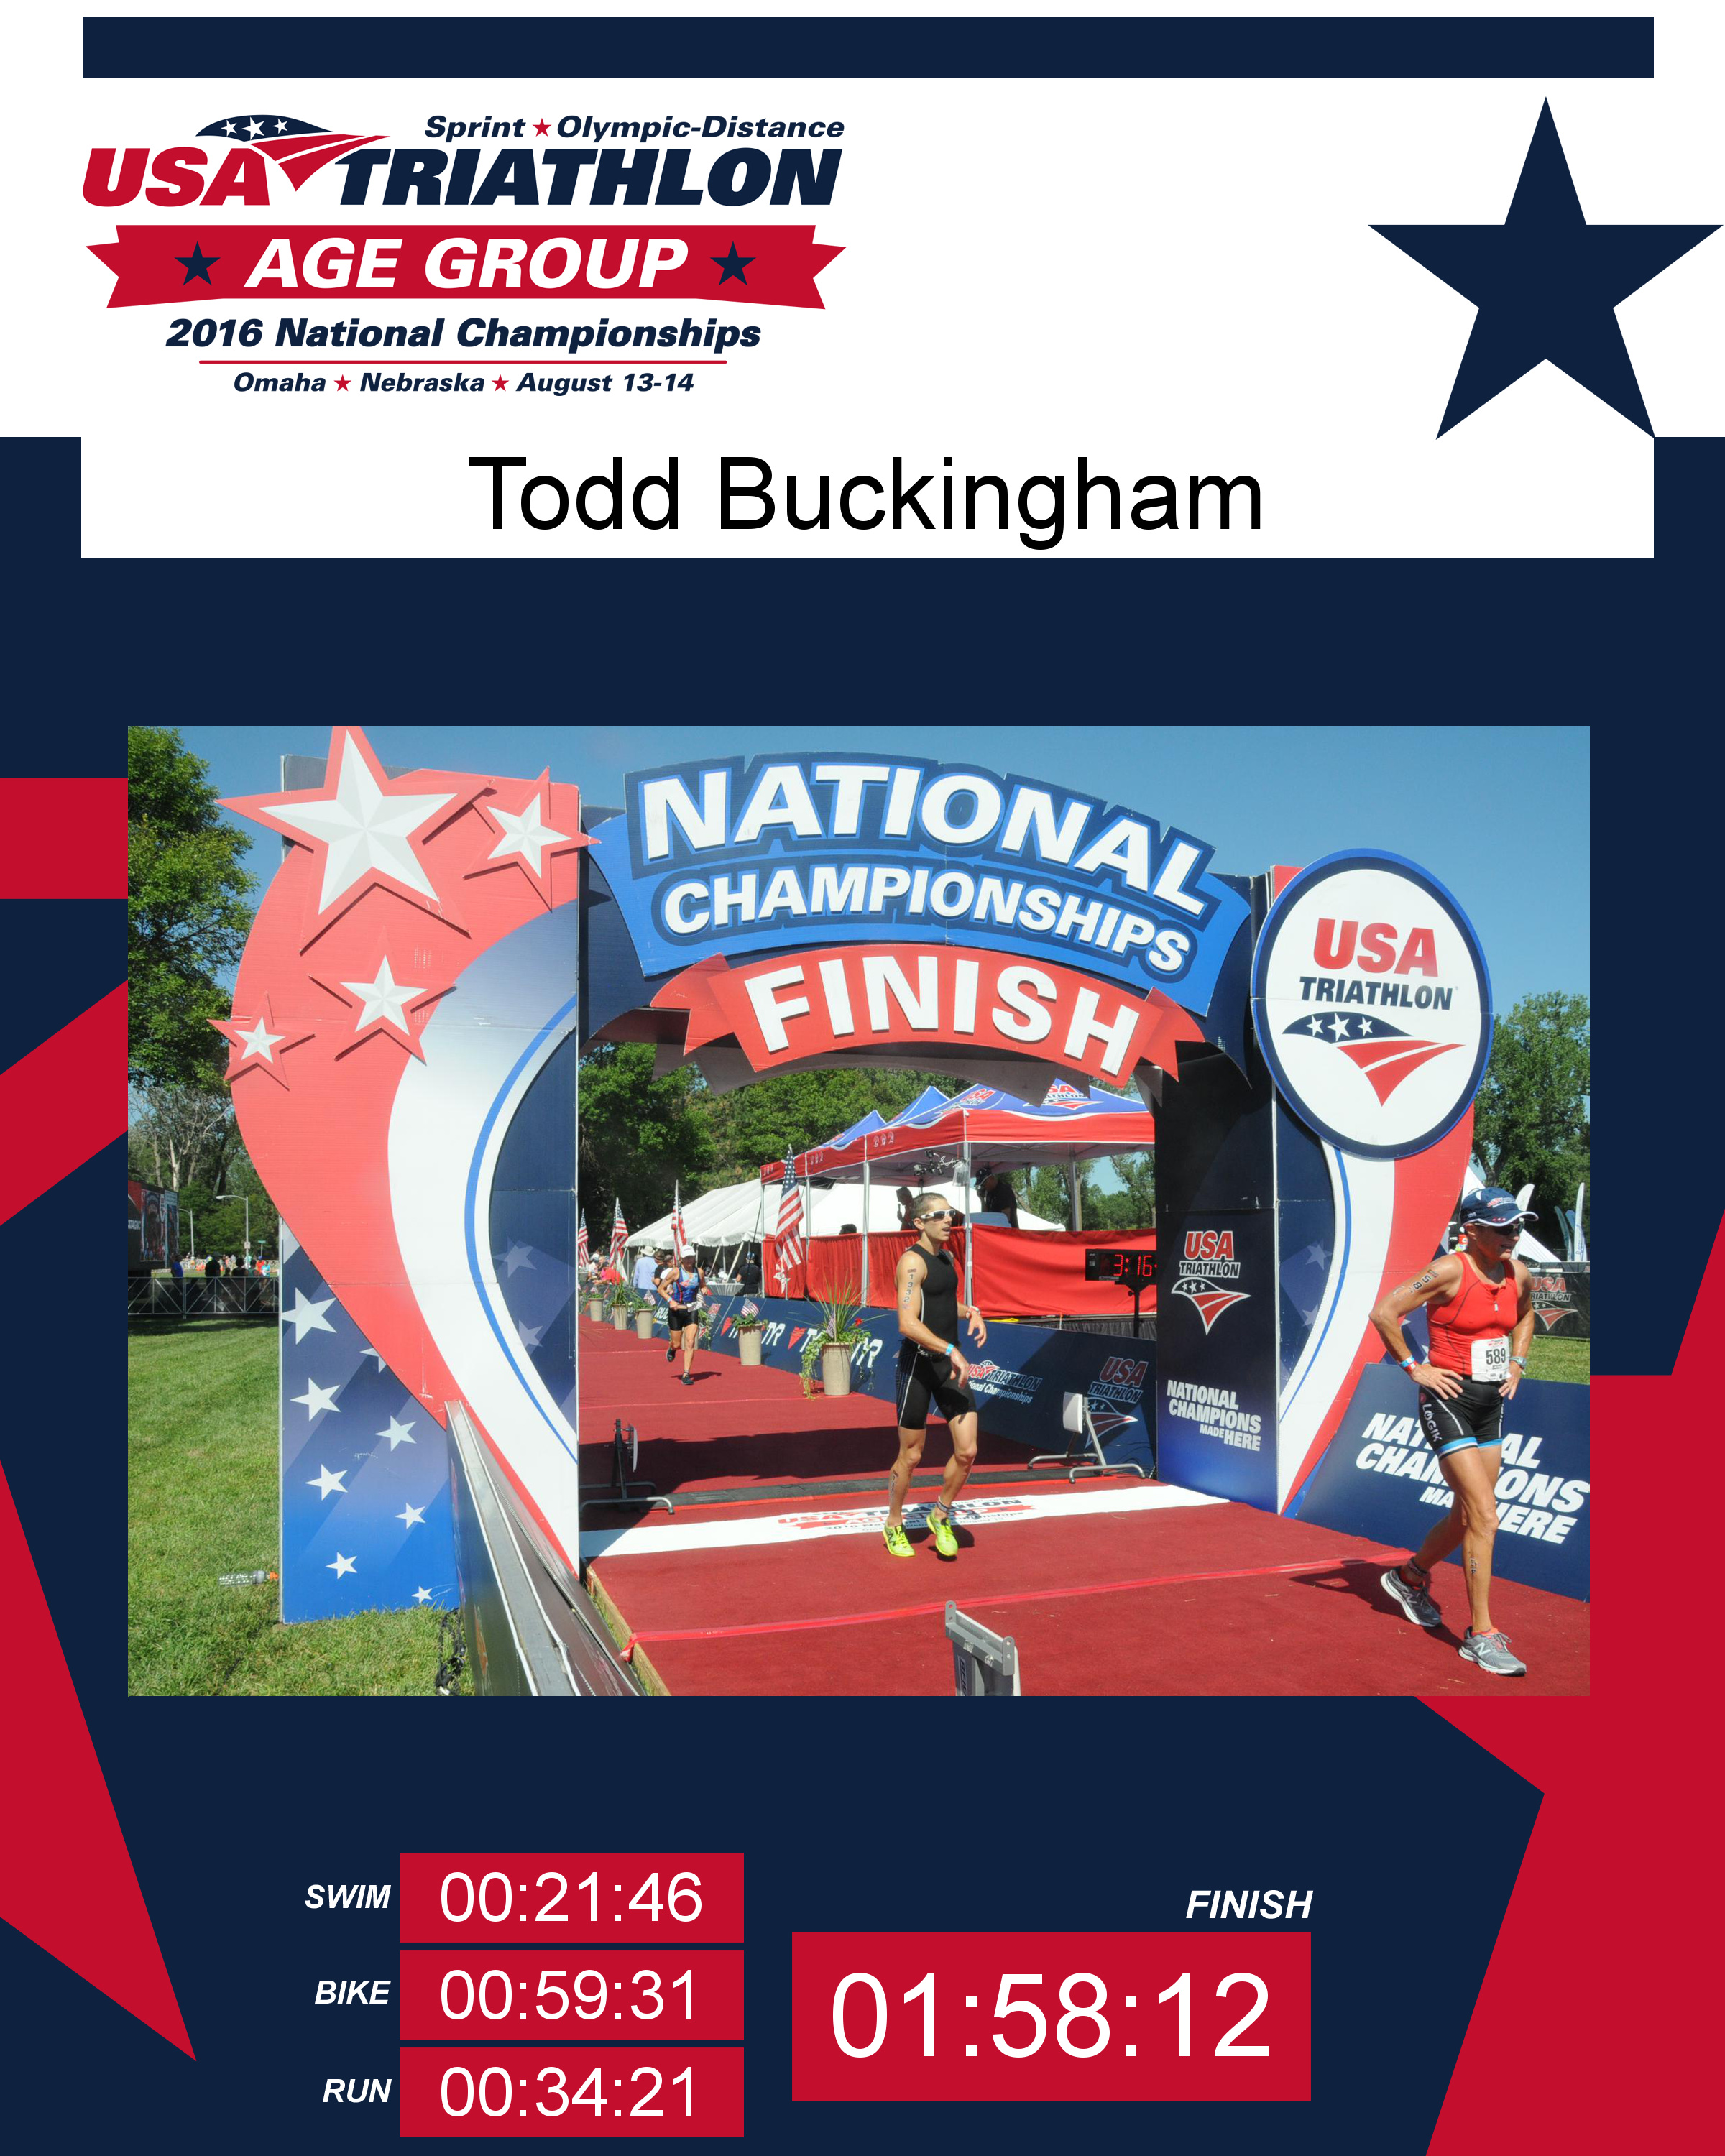 The Aftermath of the USA Triathlon Age Group National Championship — Todd Buckingham Xxx Photo